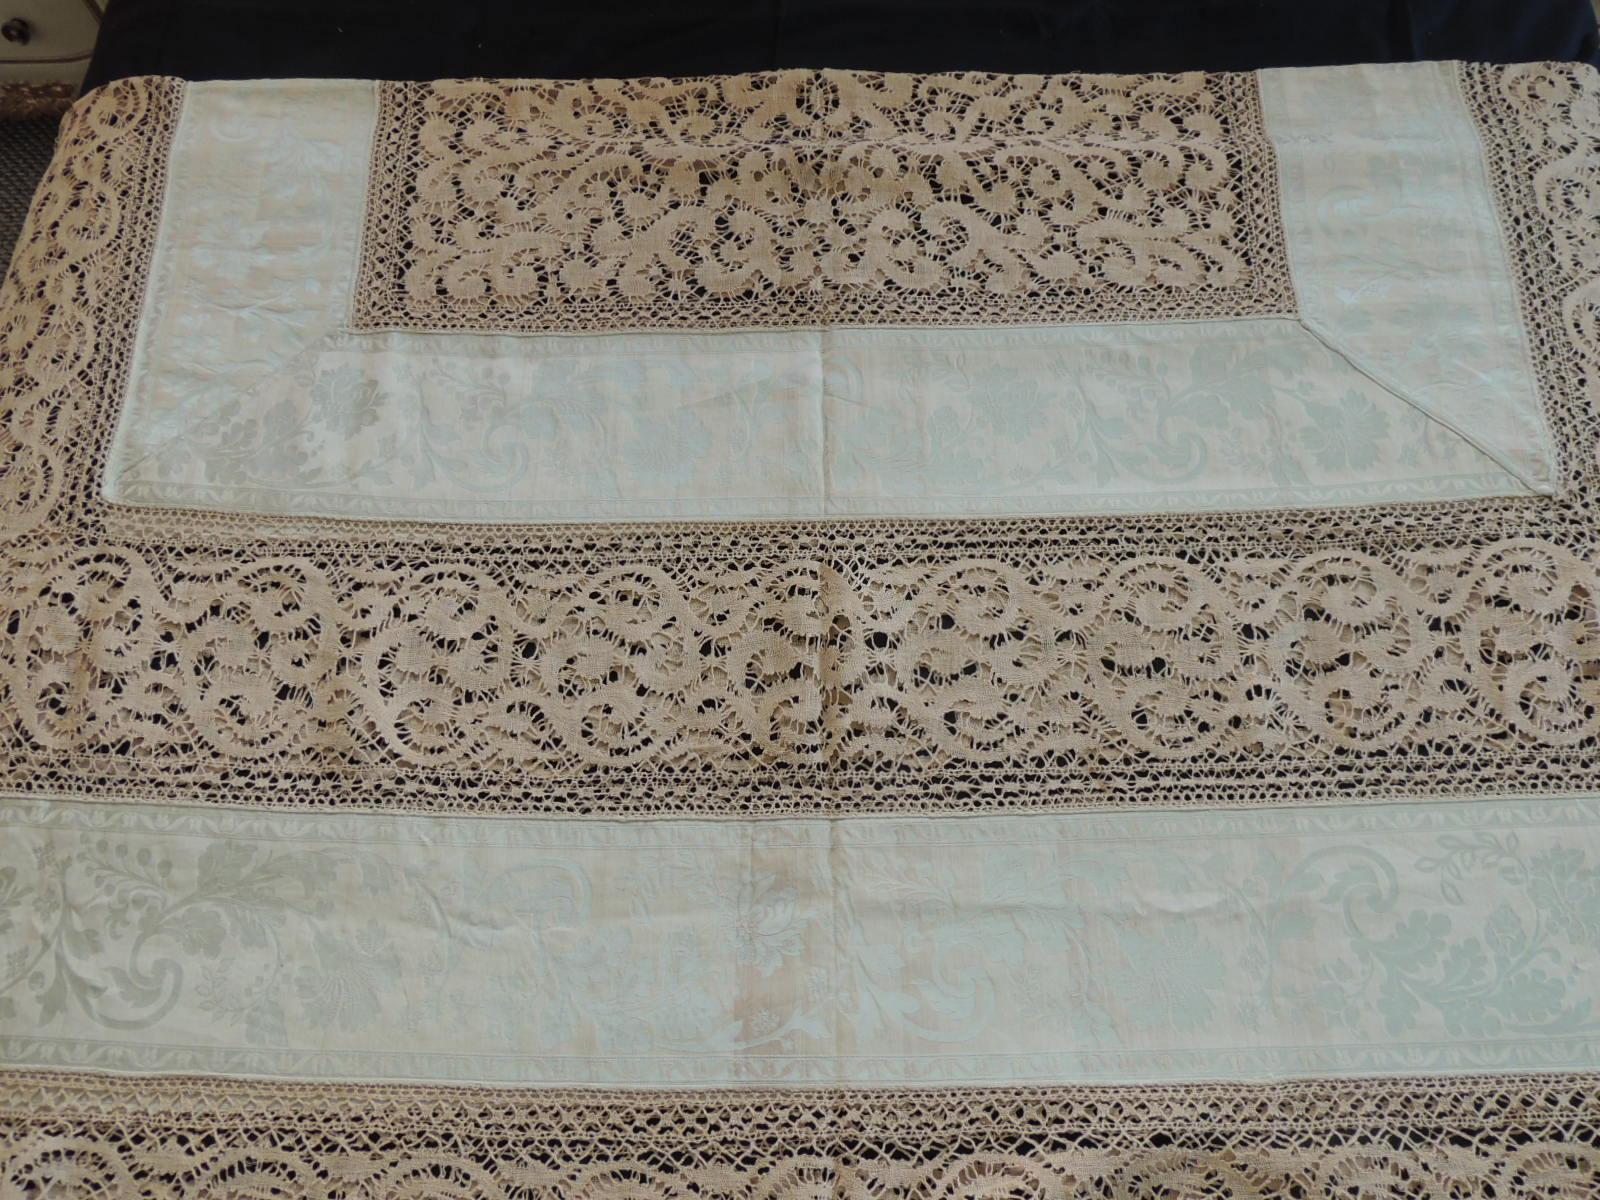 19th Century Bobbin Lace and Damask Bed Topper with Large Lace Center Panel